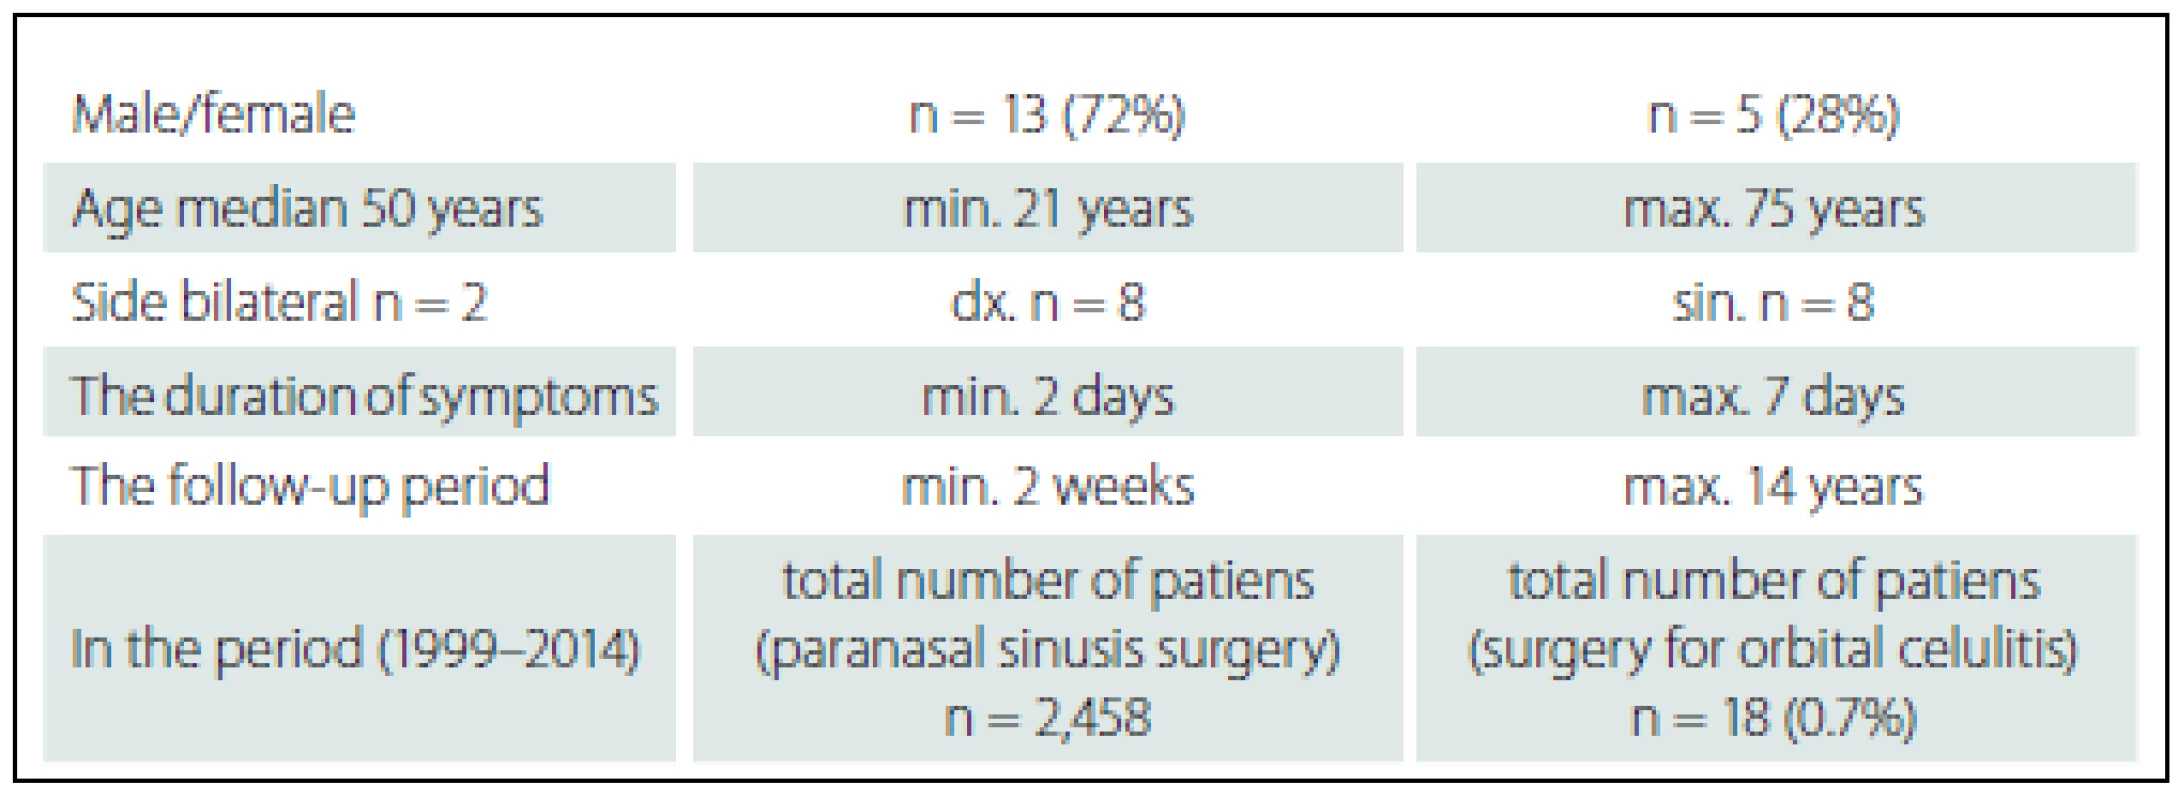 Patients with orbital cellulitis – data analysis (n = 18).